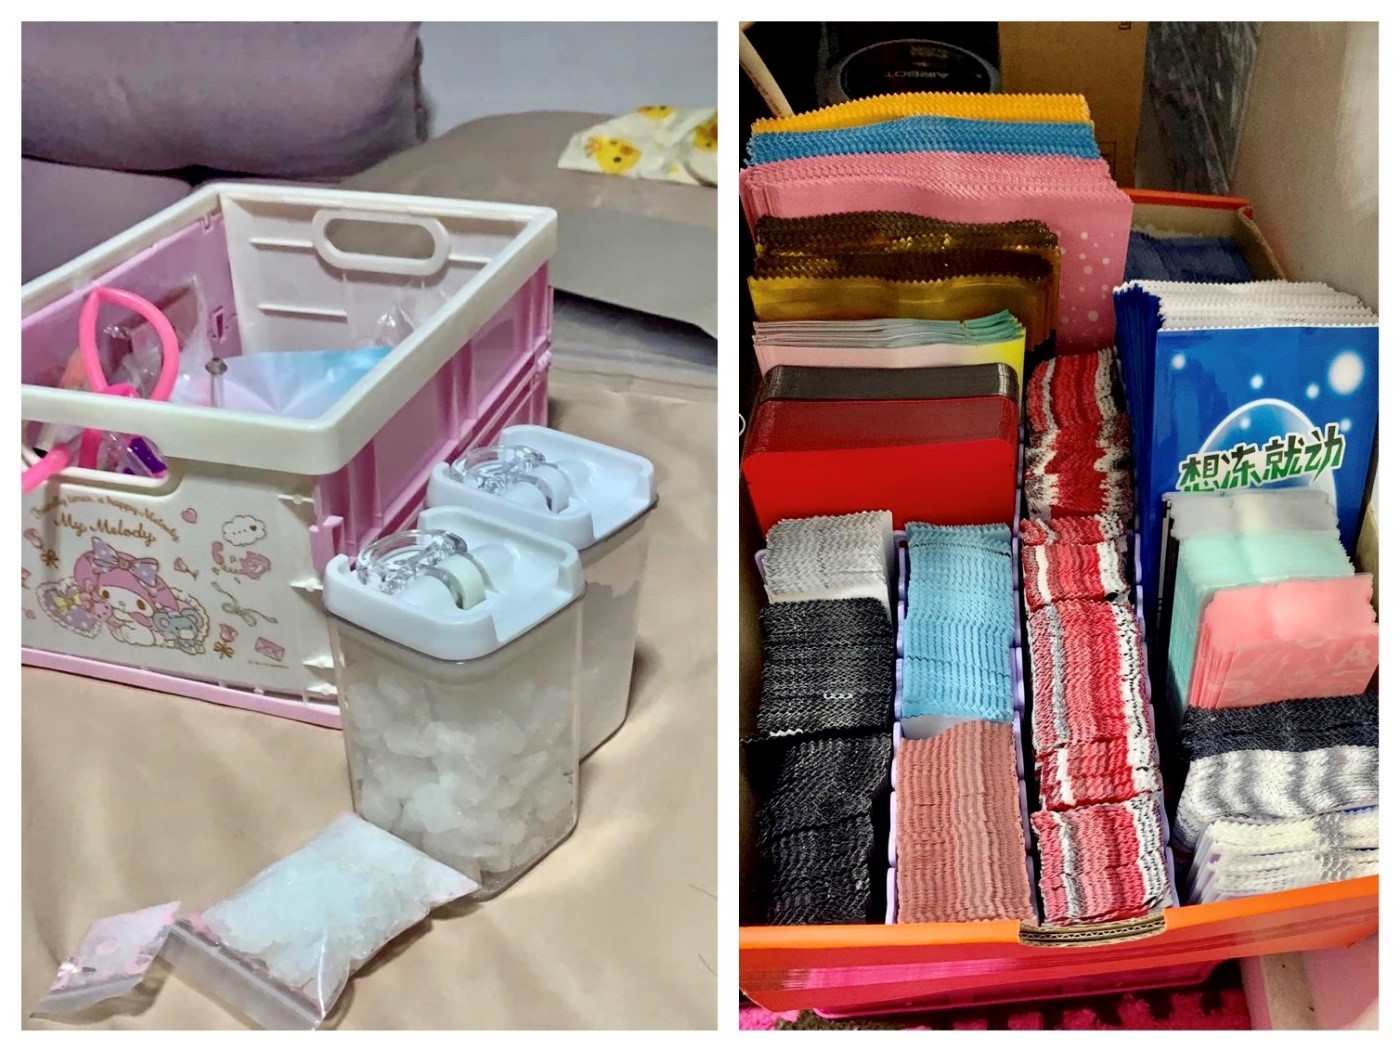 Photos 1 and 2 (CNB) – Two bottles of ‘Ice’, along with packaging materials, were seized from a residential unit in the vicinity of Boon Lay Drive on 8 September 2020